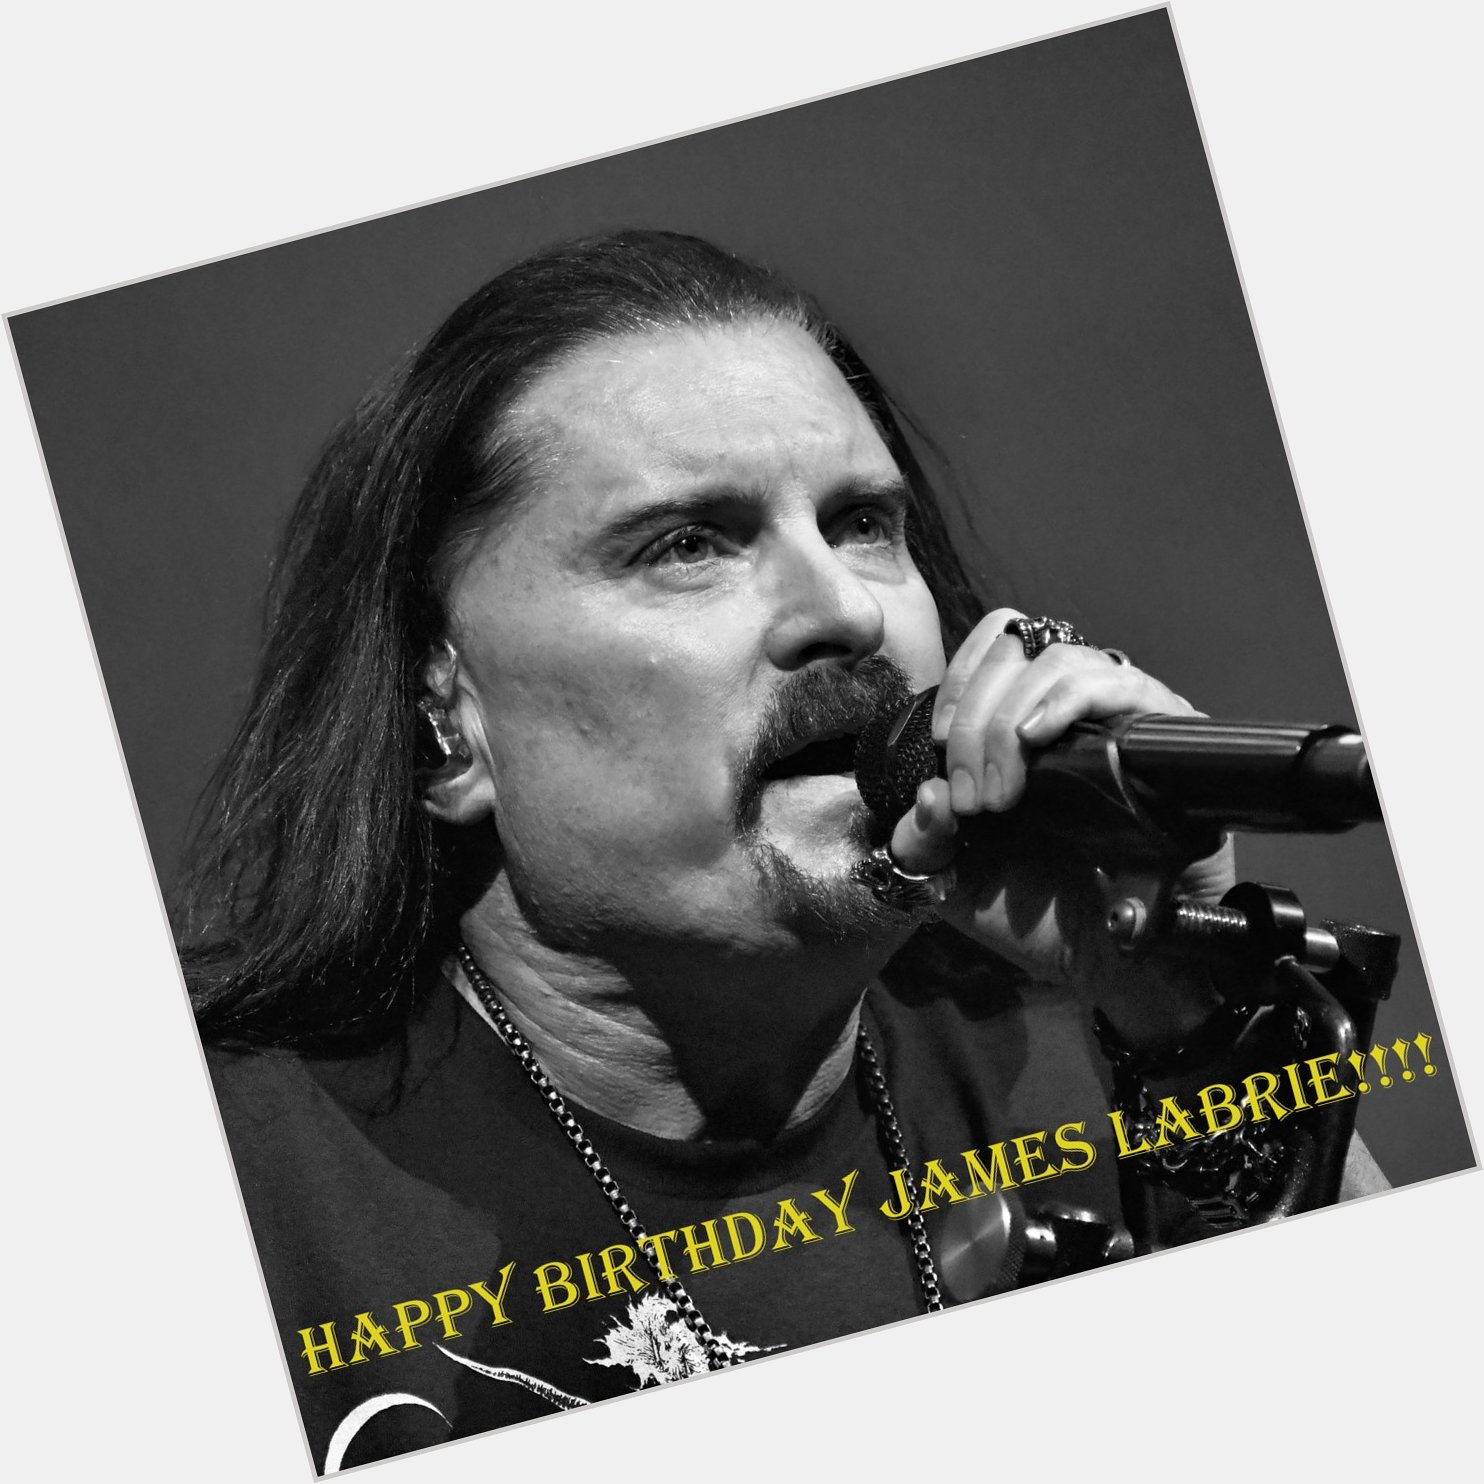 Happy Birthday to James LaBrie, the talented vocalist of Dream Theater     